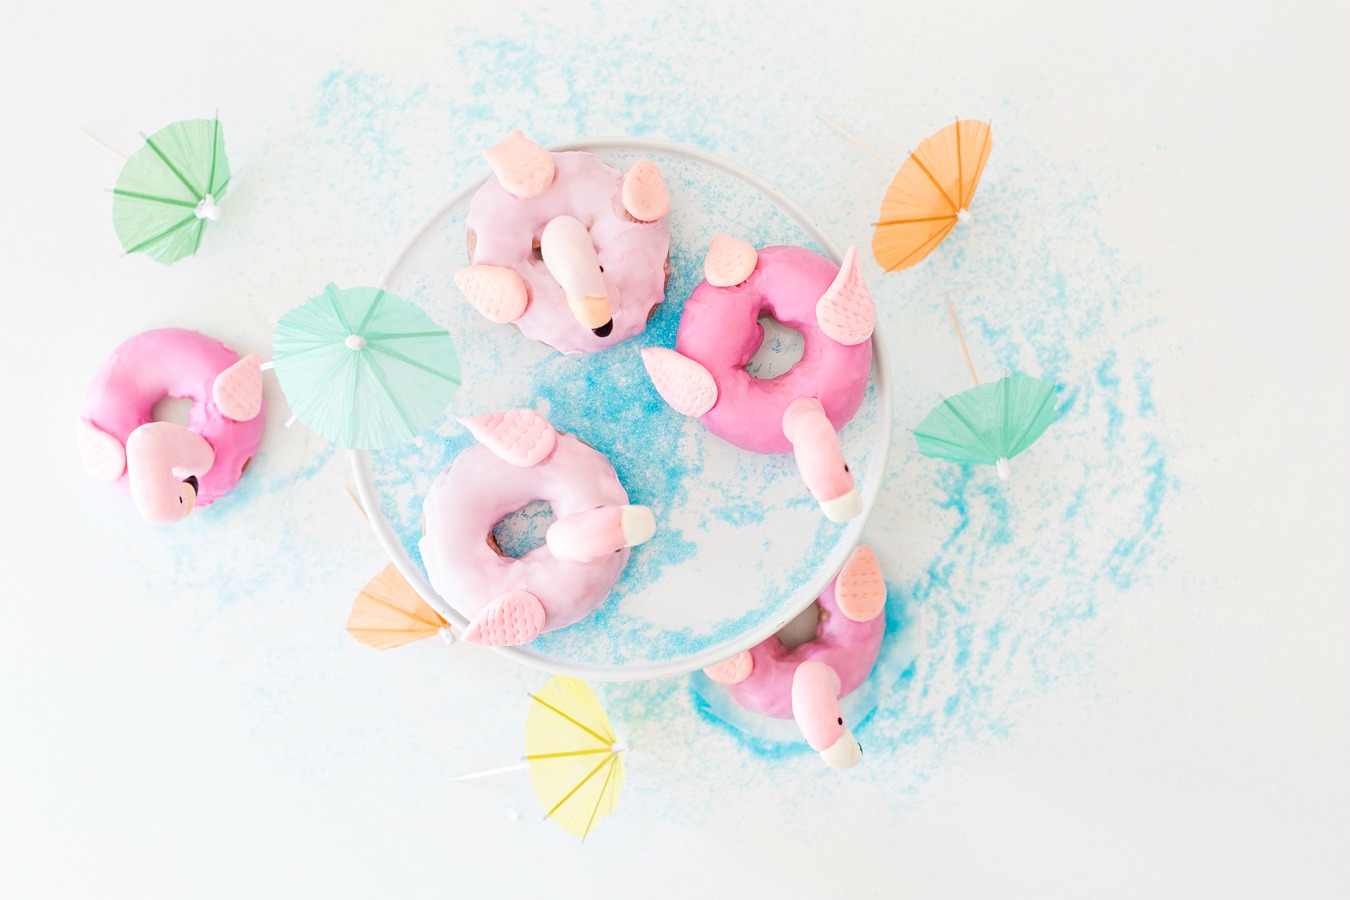 Pool float donuts